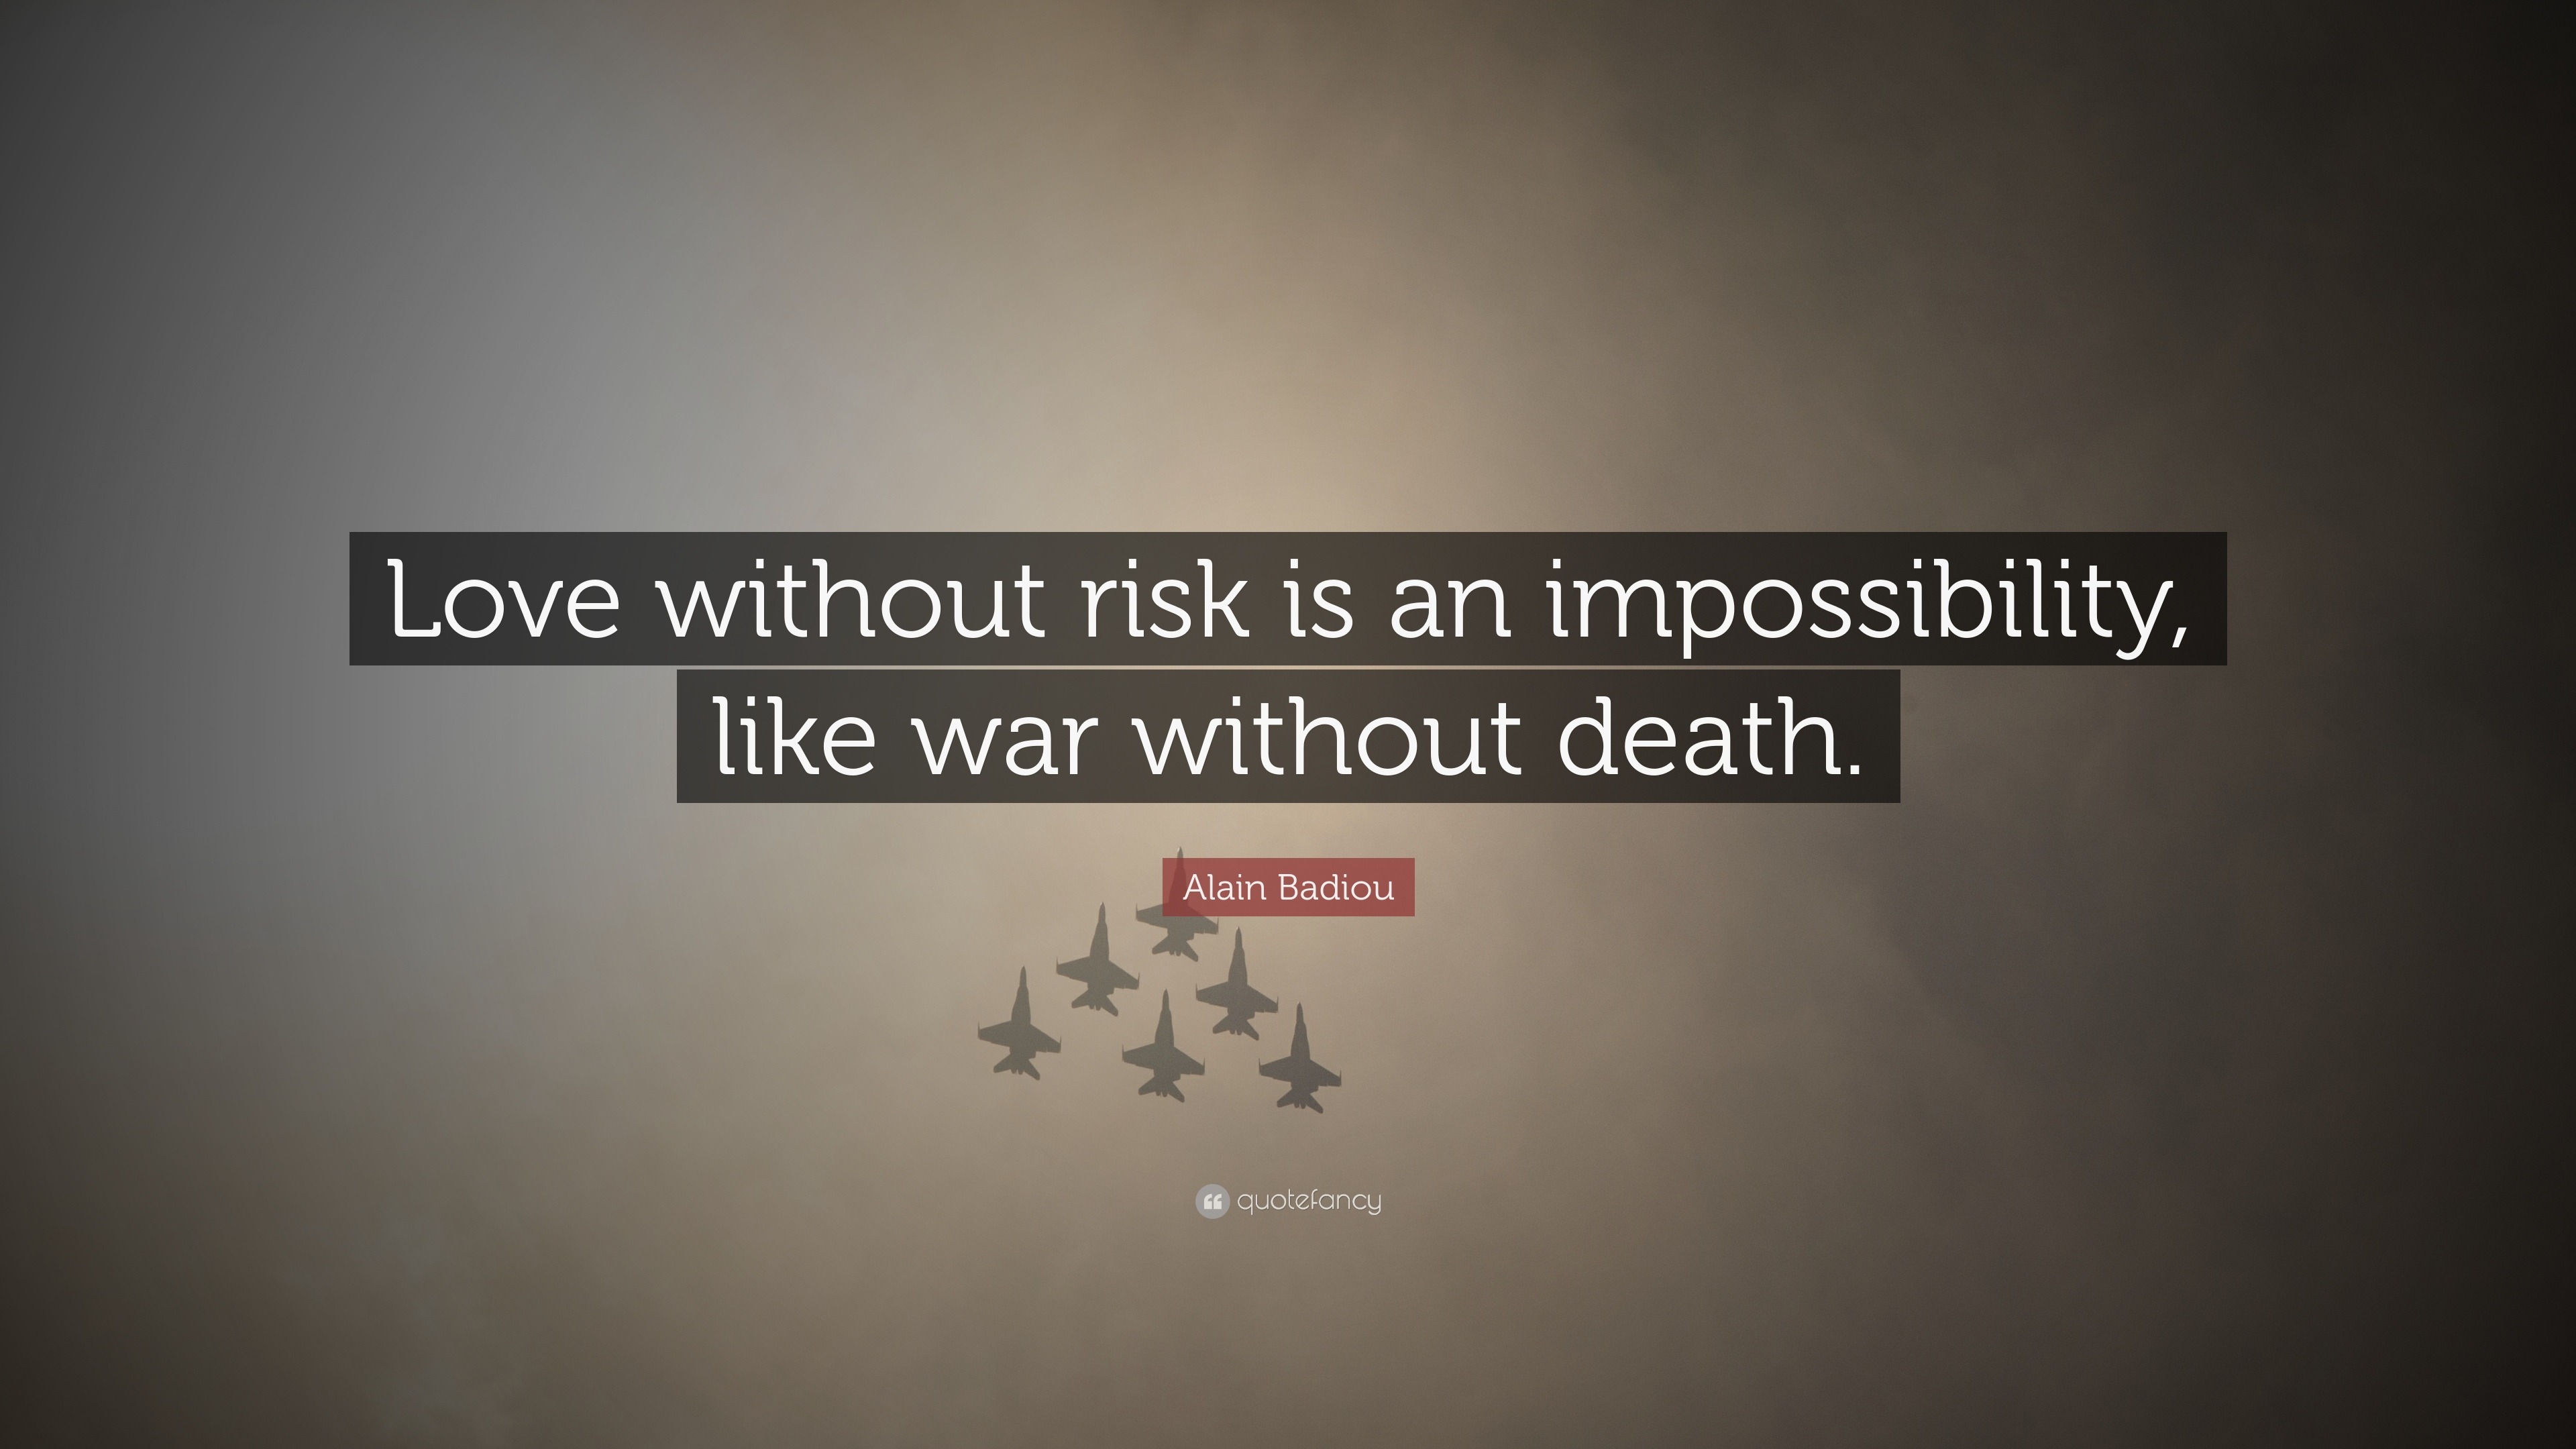 Alain Badiou Quote “Love without risk is an impossibility like war without